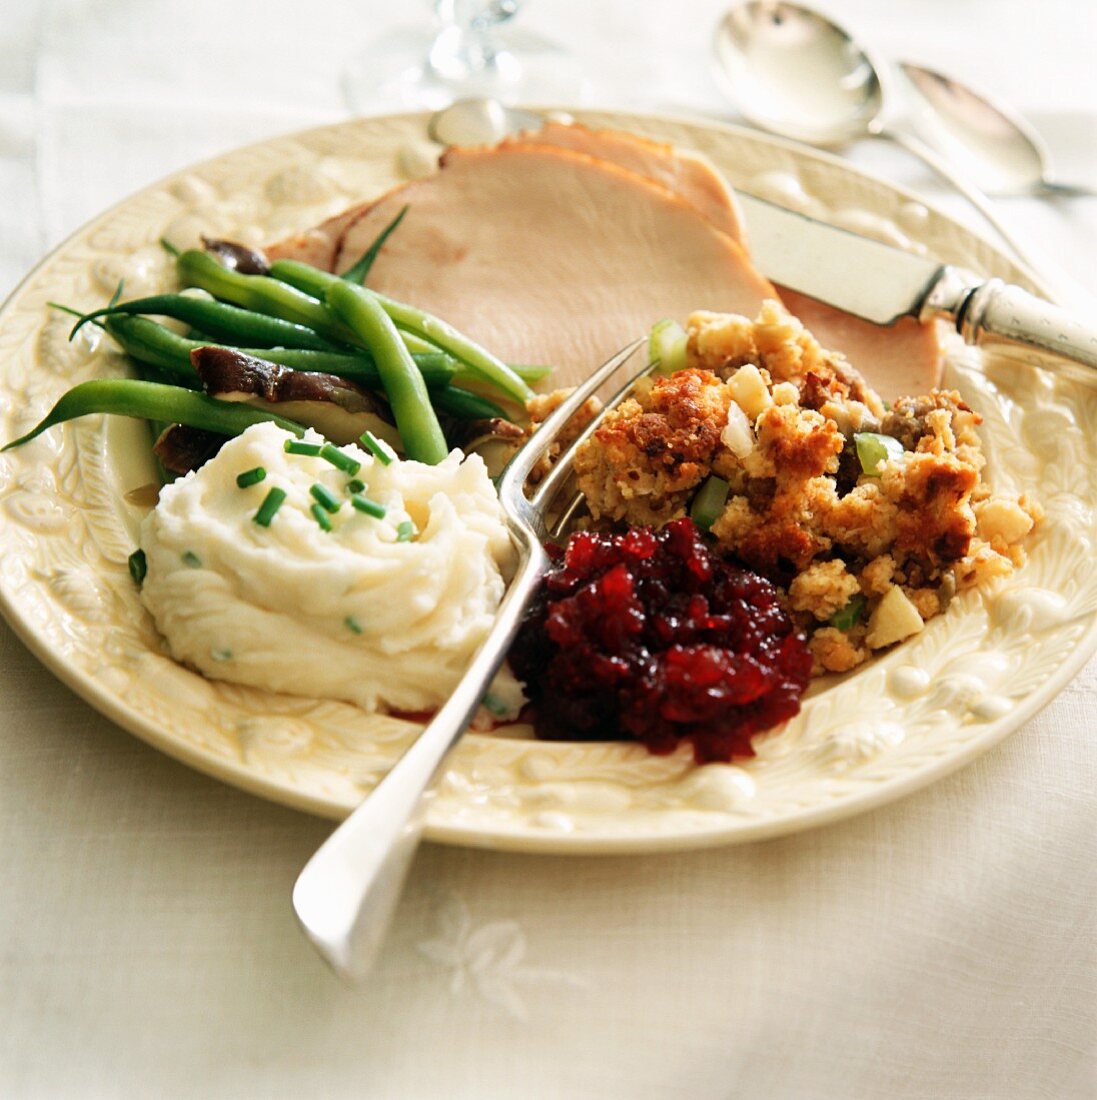 Turkey slices with accompaniments for Thanksgiving (USA)